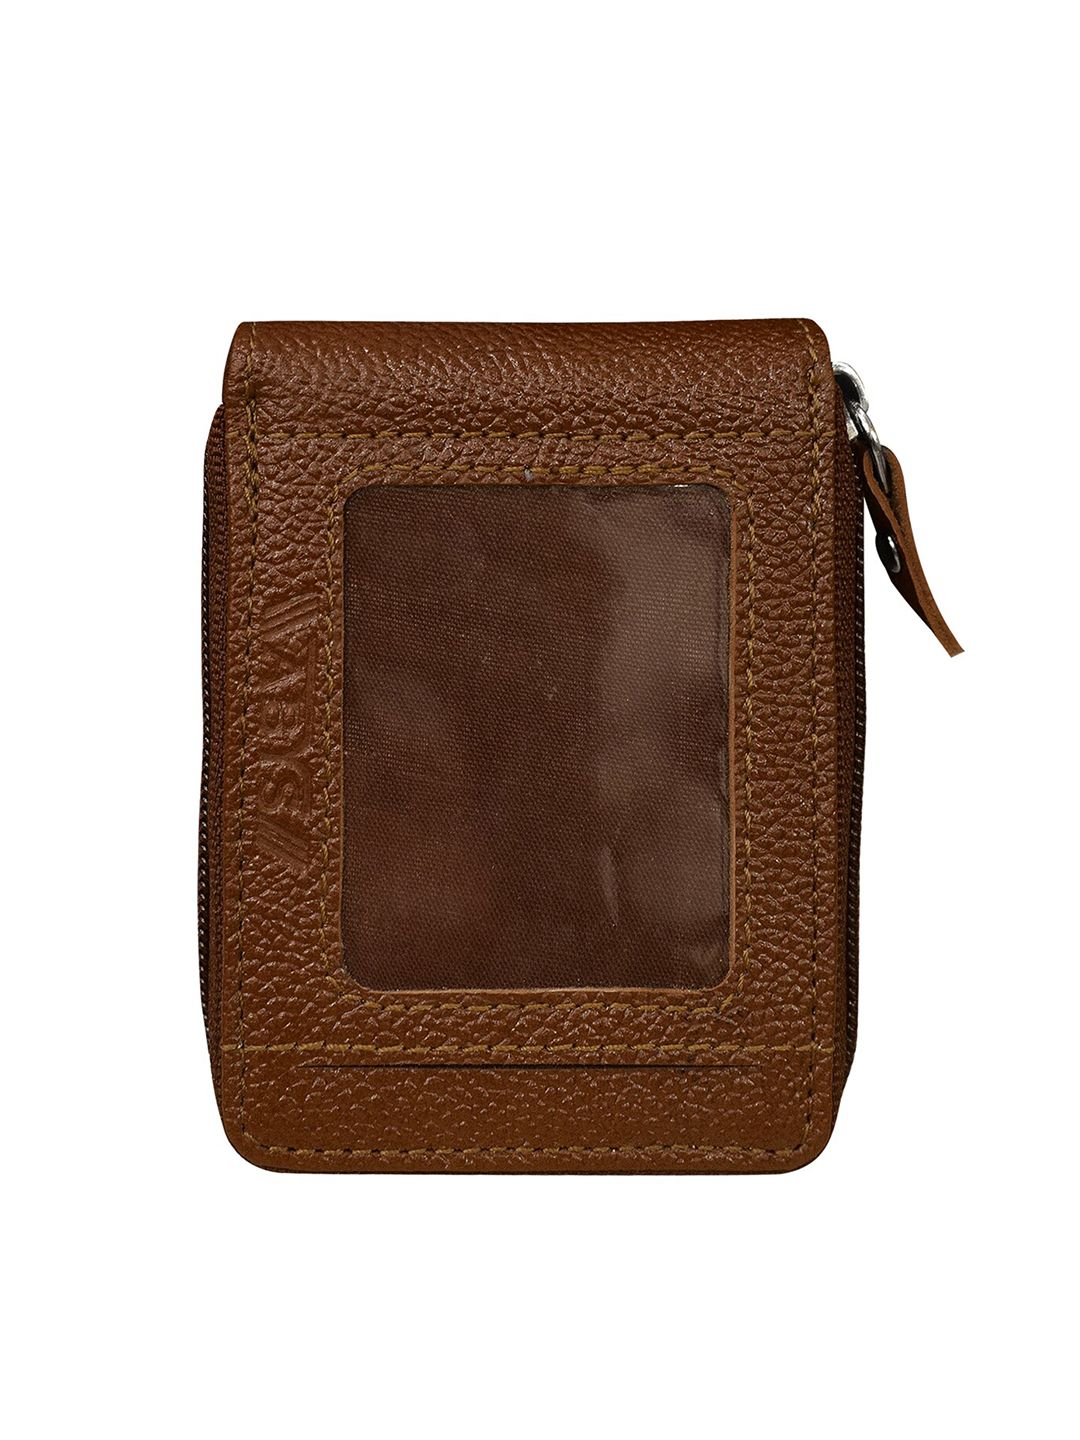 ABYS Unisex Tan Textured Leather Zip Around Wallet Price in India